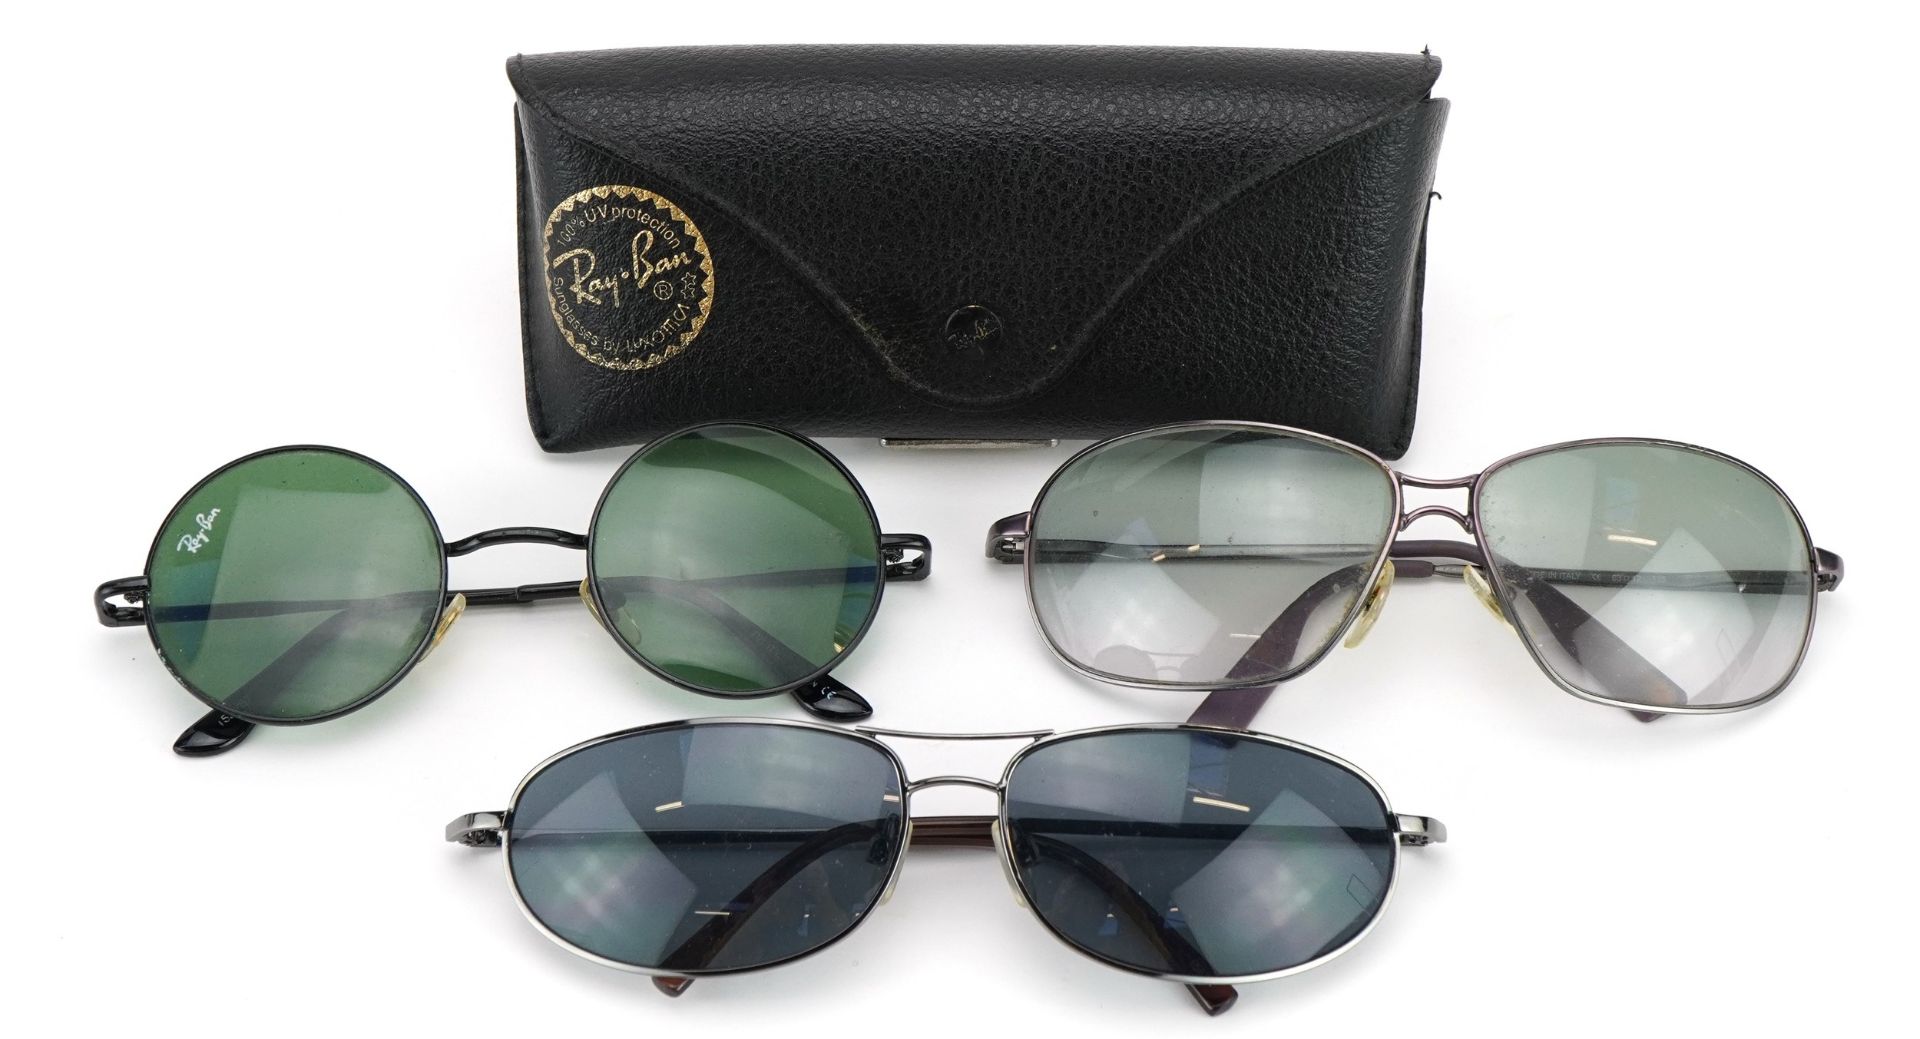 Three pairs of vintage sunglasses including RayBan and Calvin Klein